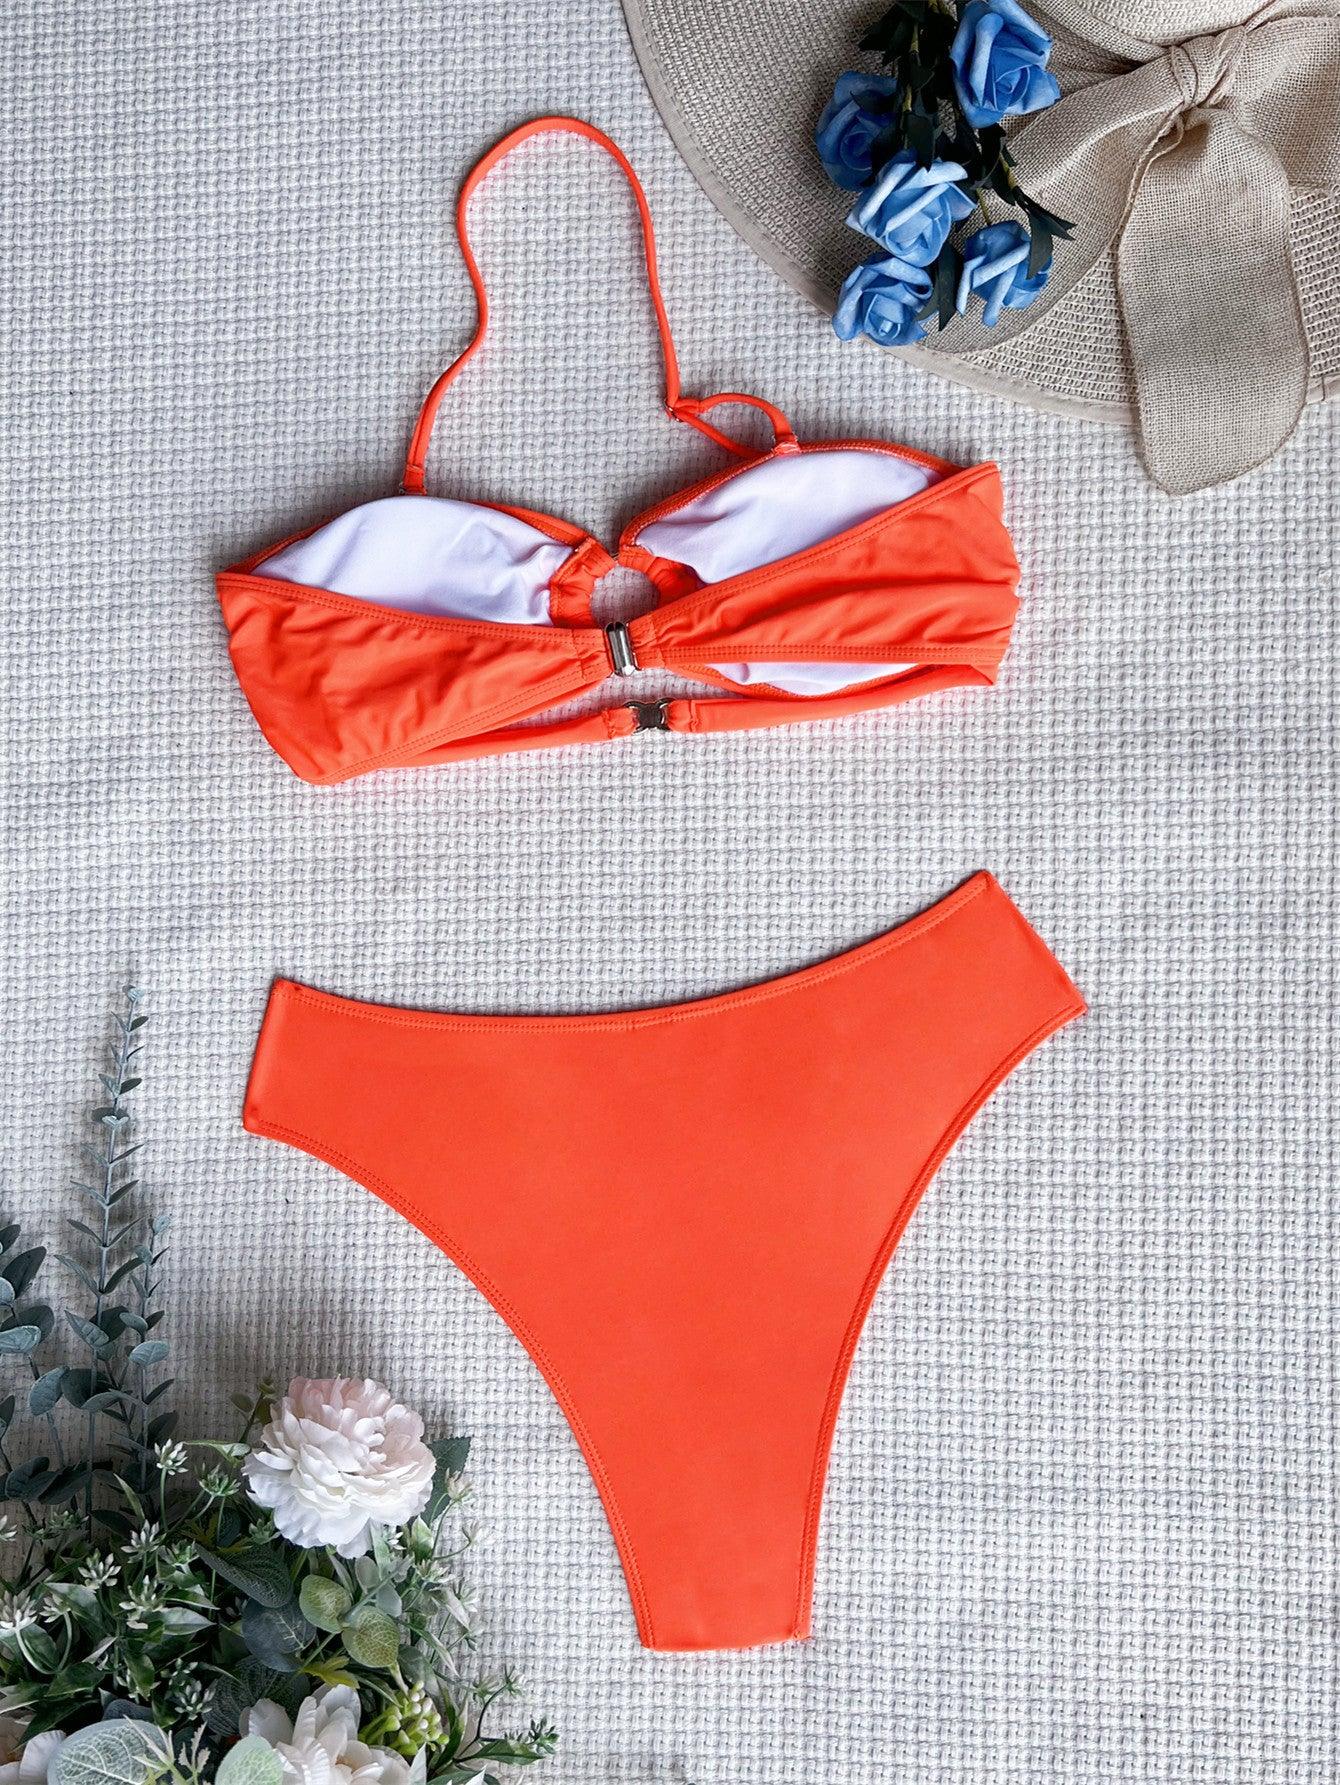 Boho Backless Solid Color Bikini Swimsuit with Cutout Details and Halter Strap - ForVanity swimwear, women's lingerie, women's swimwear Swimwear